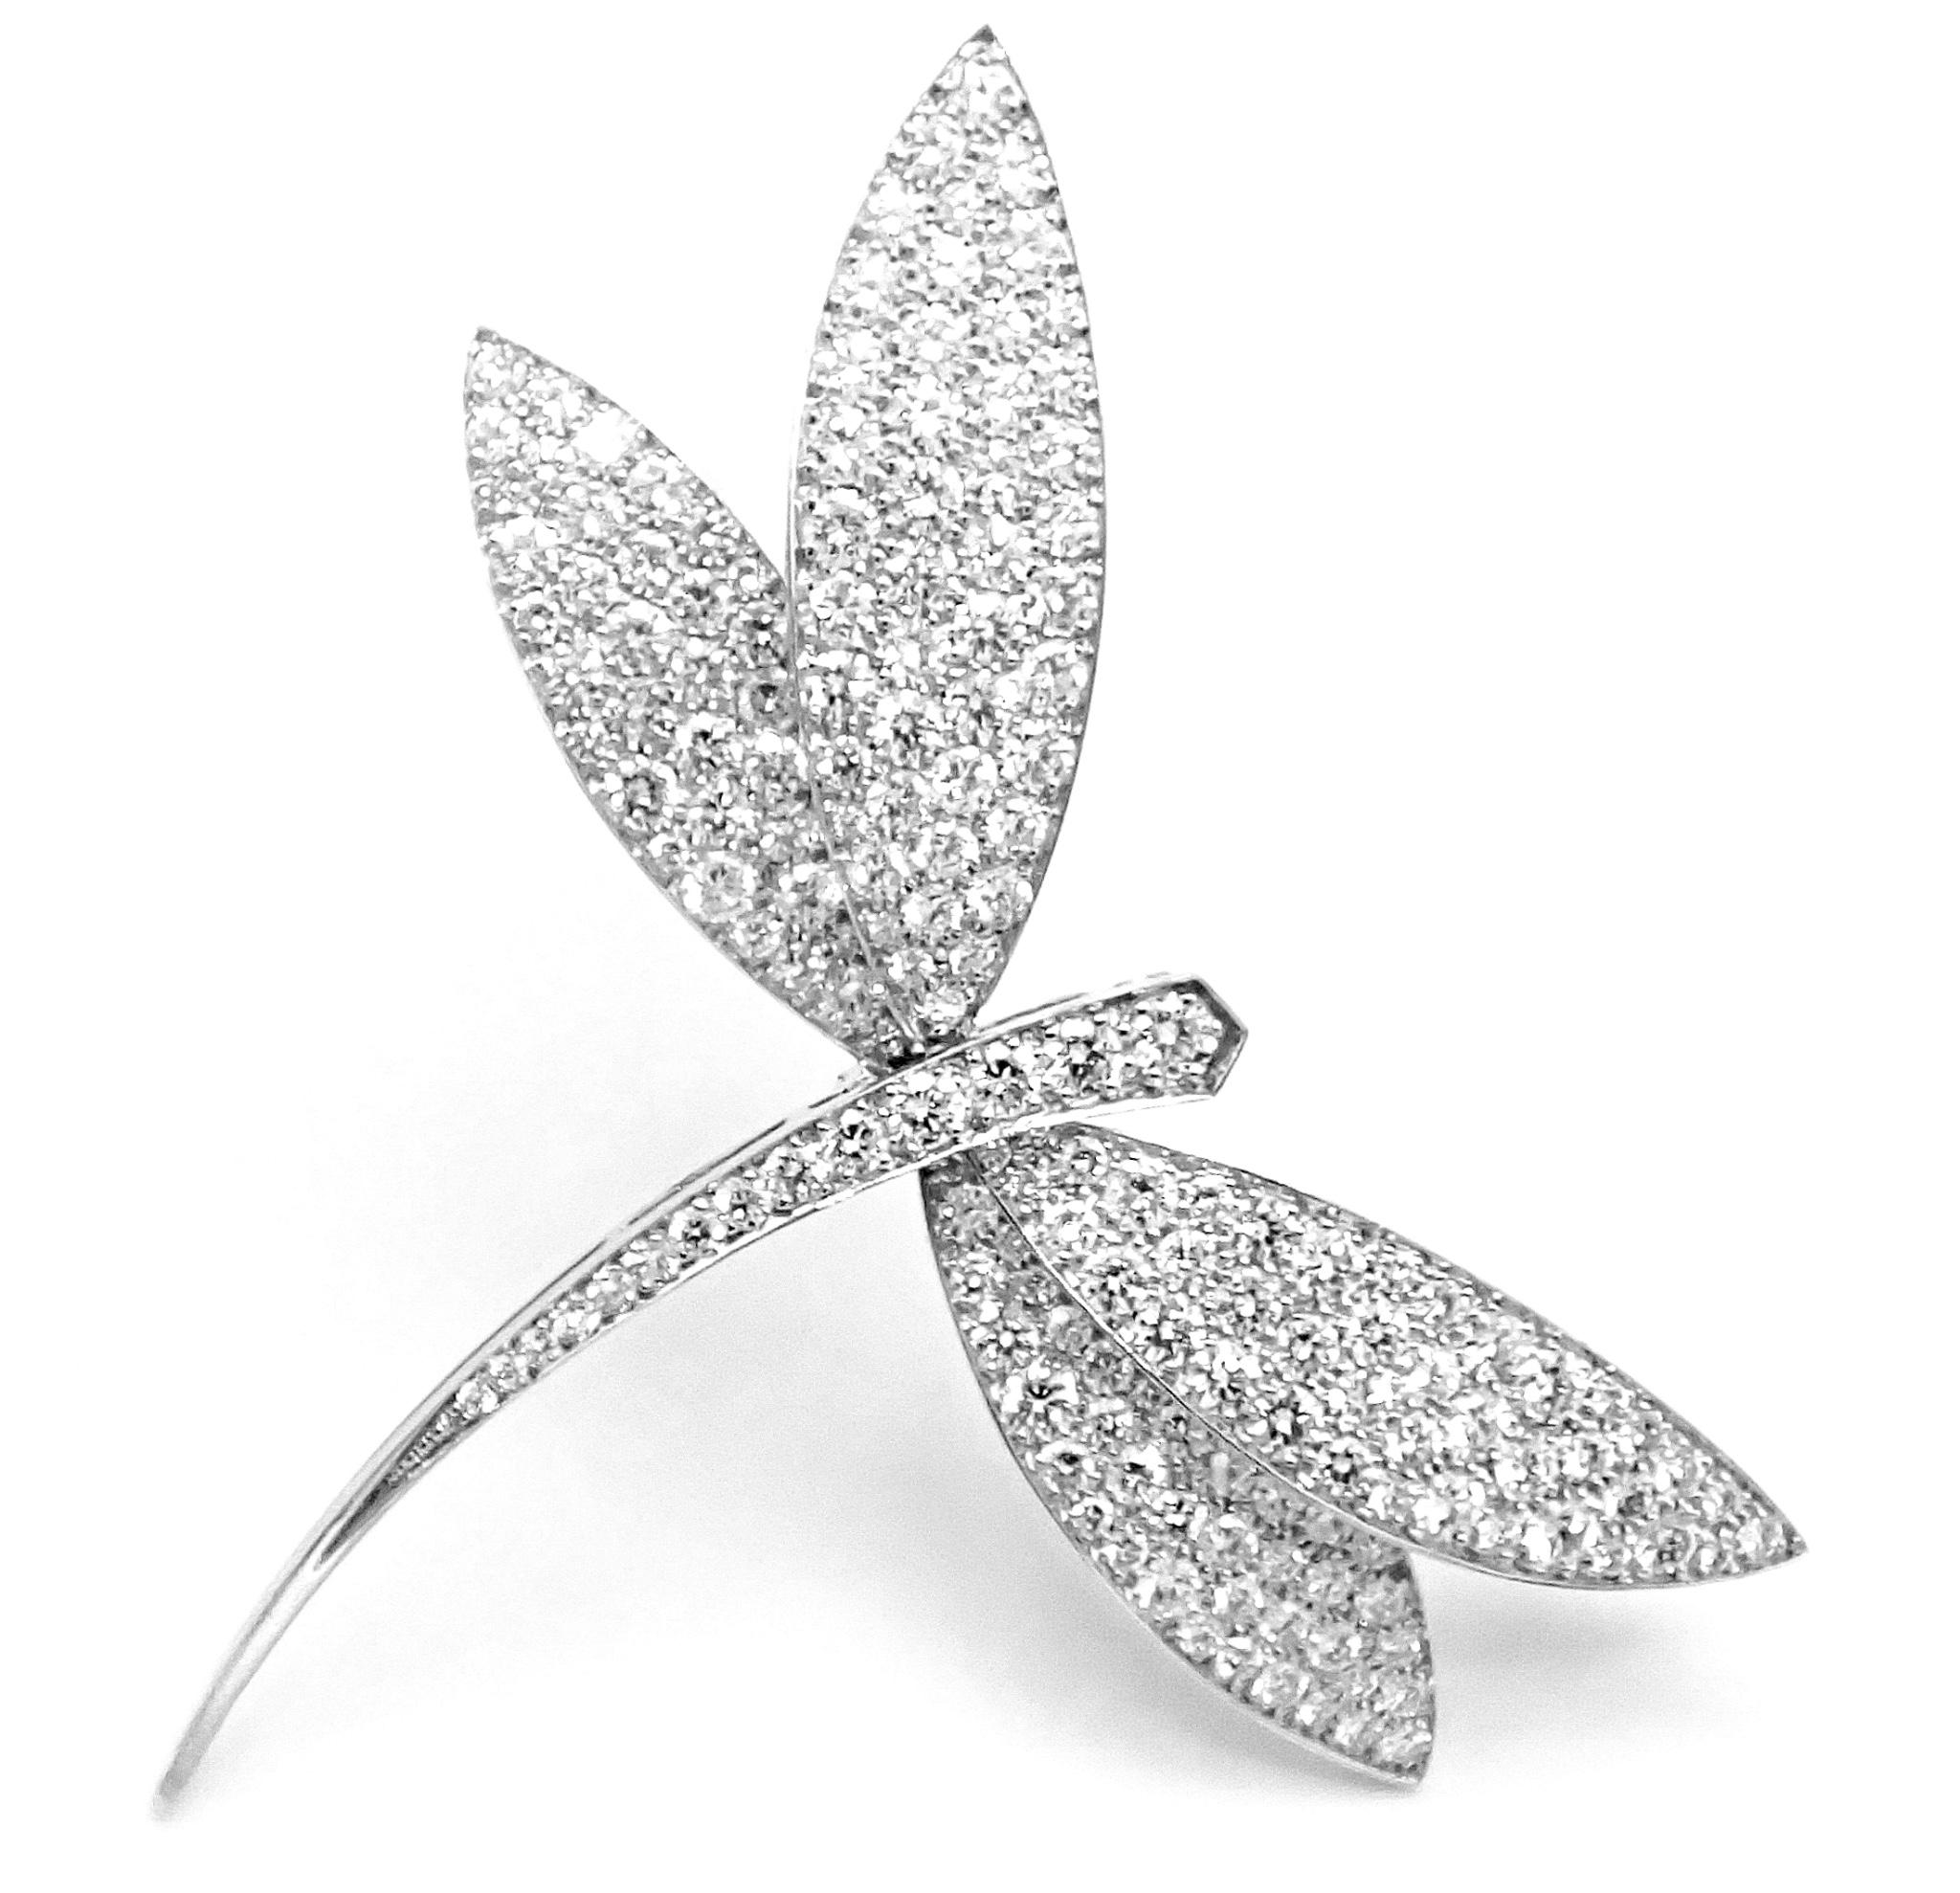 18k White Gold Diamond Extra Large Dragonfly Brooch Pin by Van Cleef & Arpels. 
With Round brilliant cut diamonds VVS1 clarity, E color total weight approximately 6ct
Details: 
Weight: 16 grams
Measurements: 55mm x 61mm
Stamped Hallmarks: Van Cleef